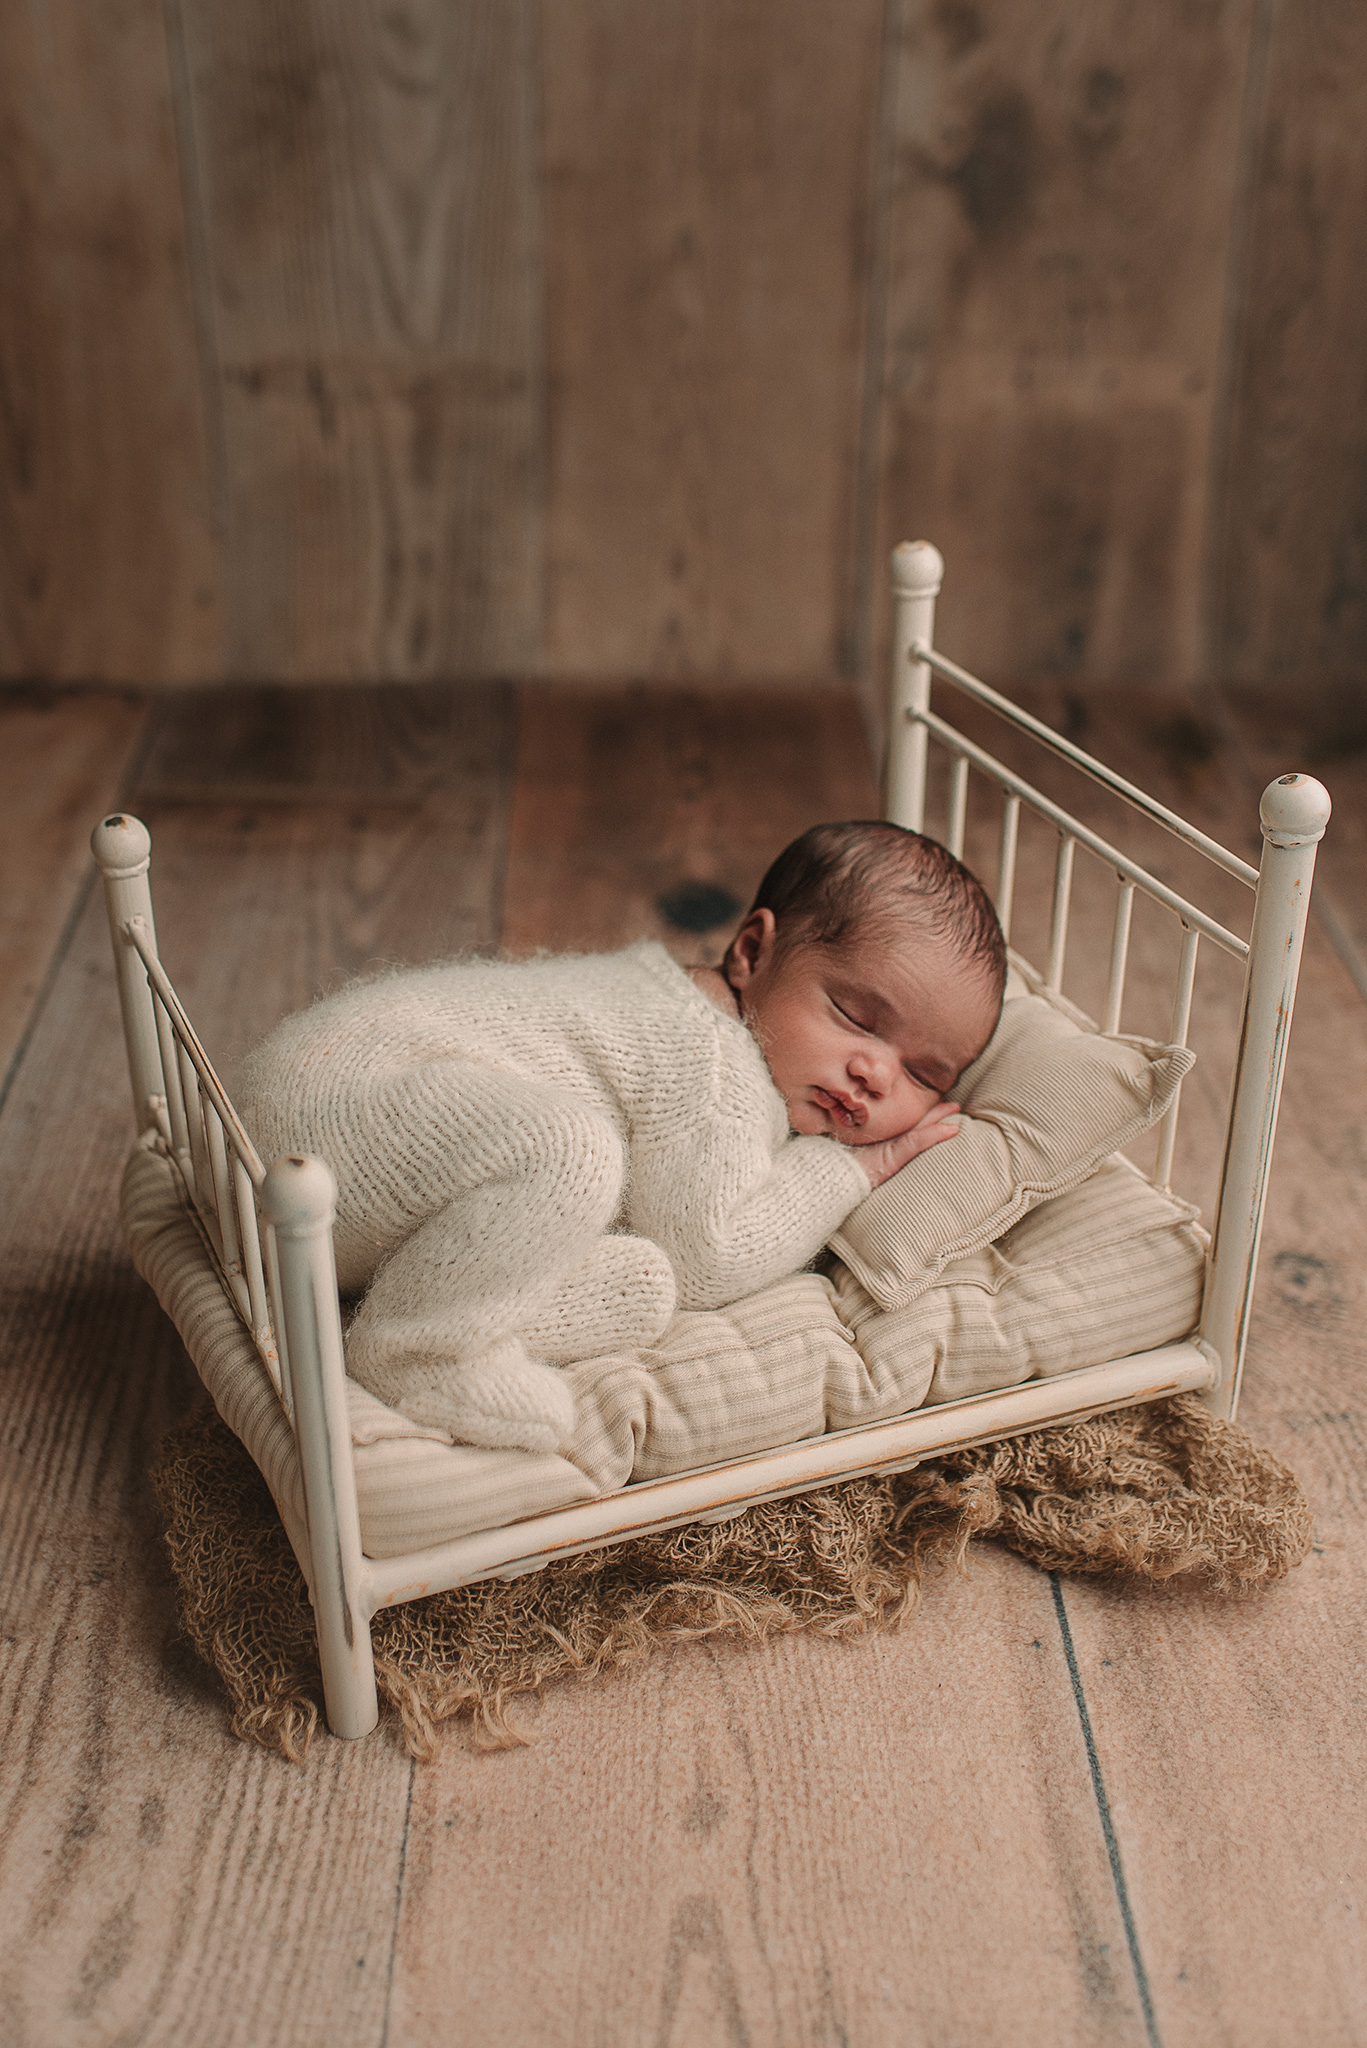 newborn boy posed in prop bed for photography session, newborn photoshoot lnk, in home newborn photography nebraska